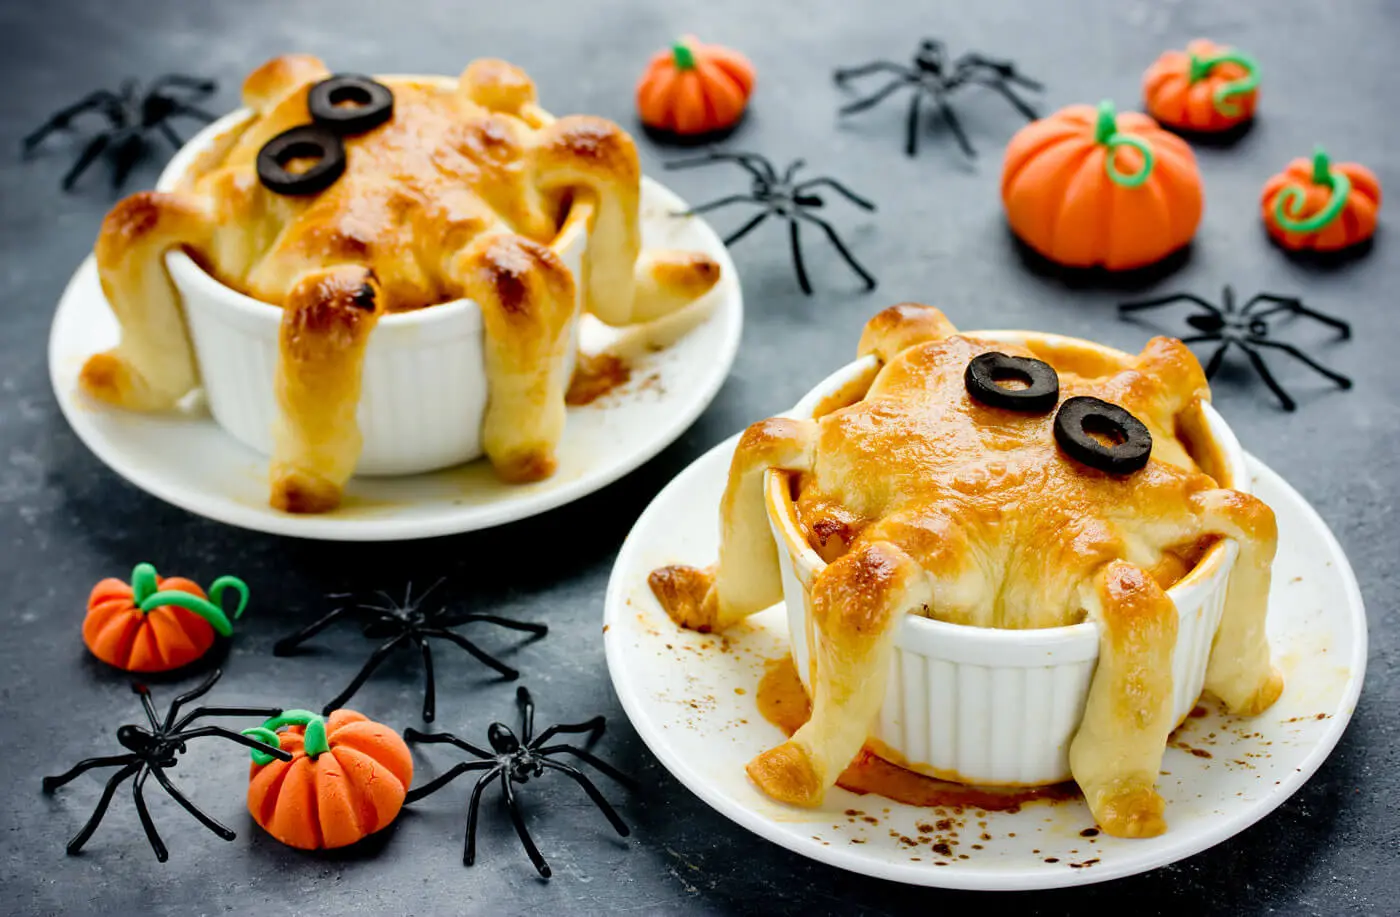 Moy Park Chicken Blog - Ghoulishly Good Halloween Treats With Moy Park